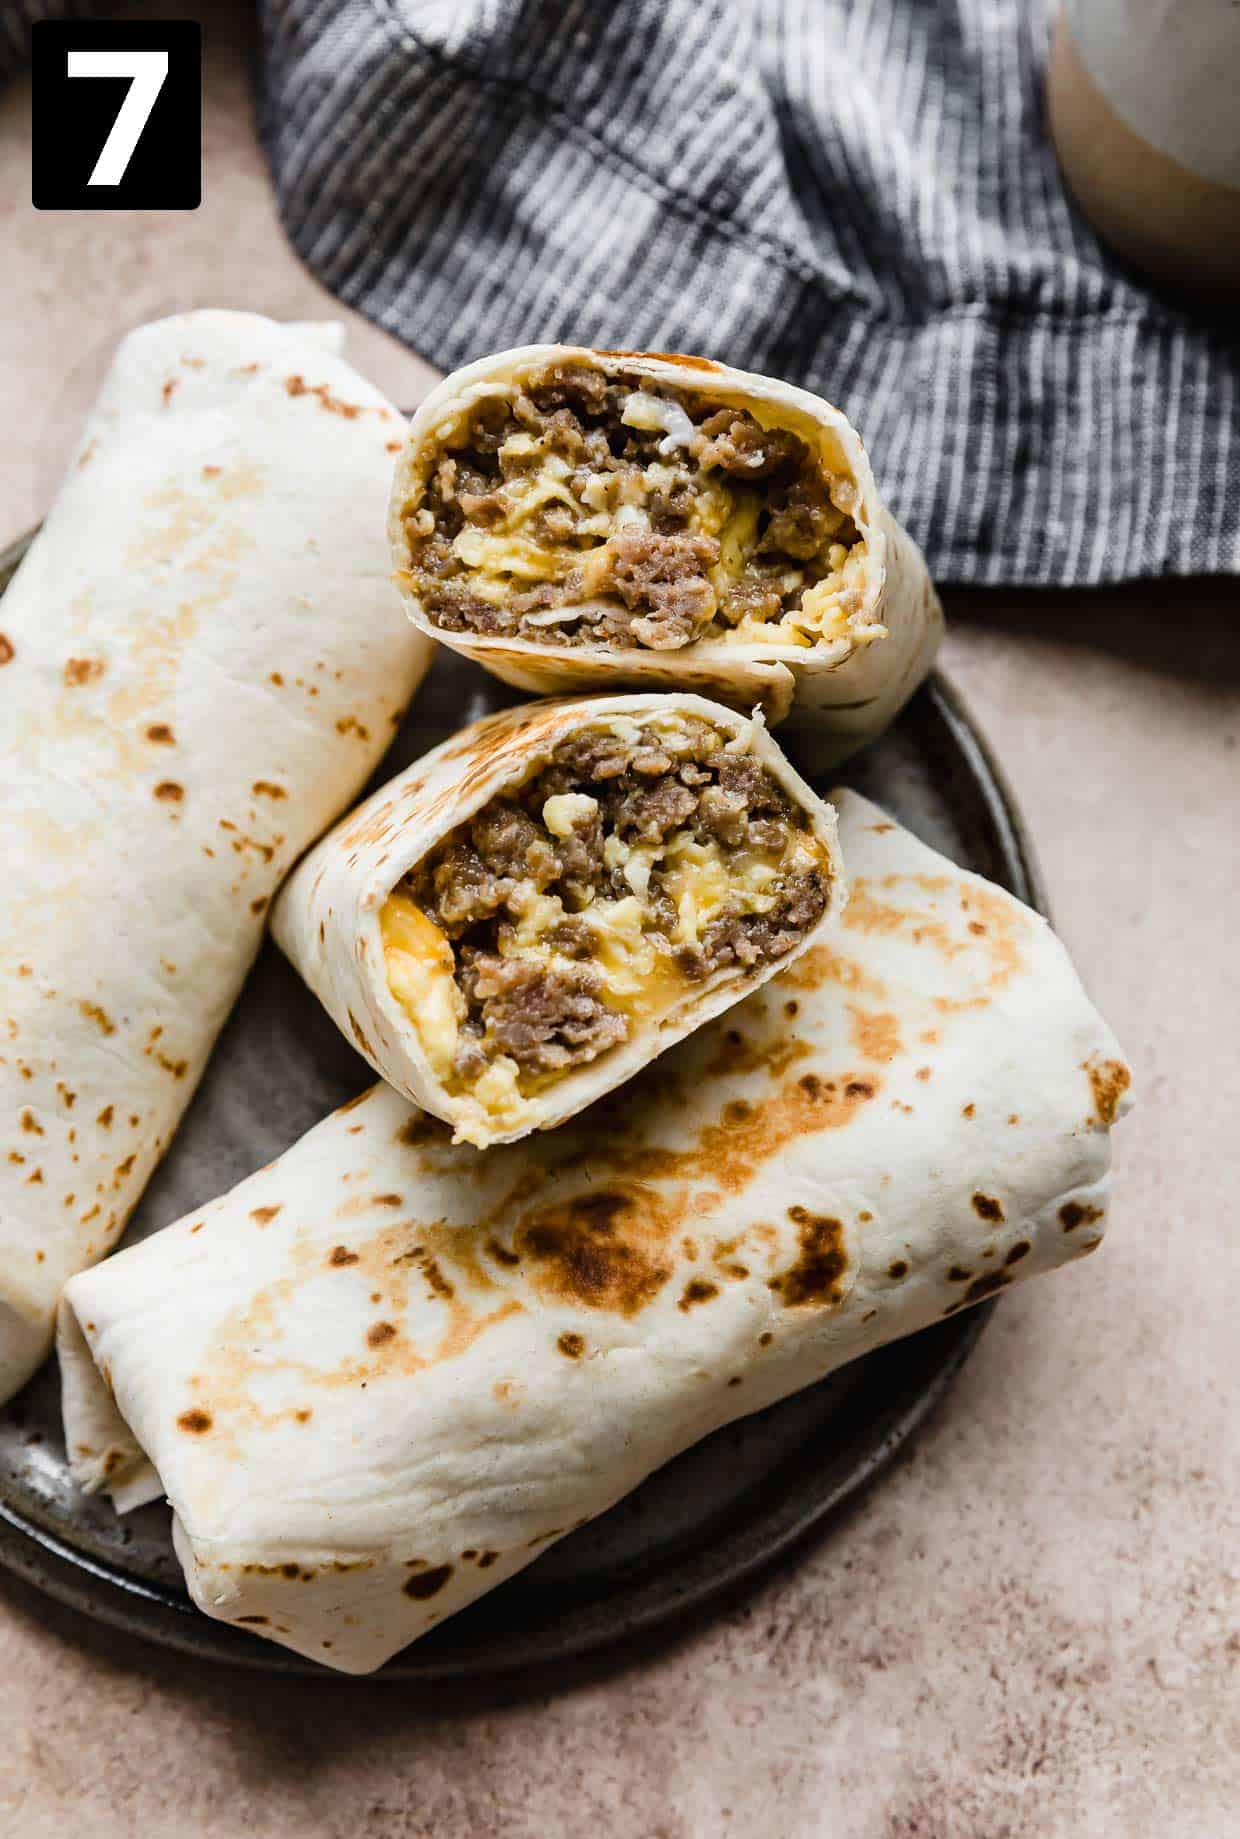 A Jimmy Dean Breakfast Burrito cut in half on a gray plate on a tan background.